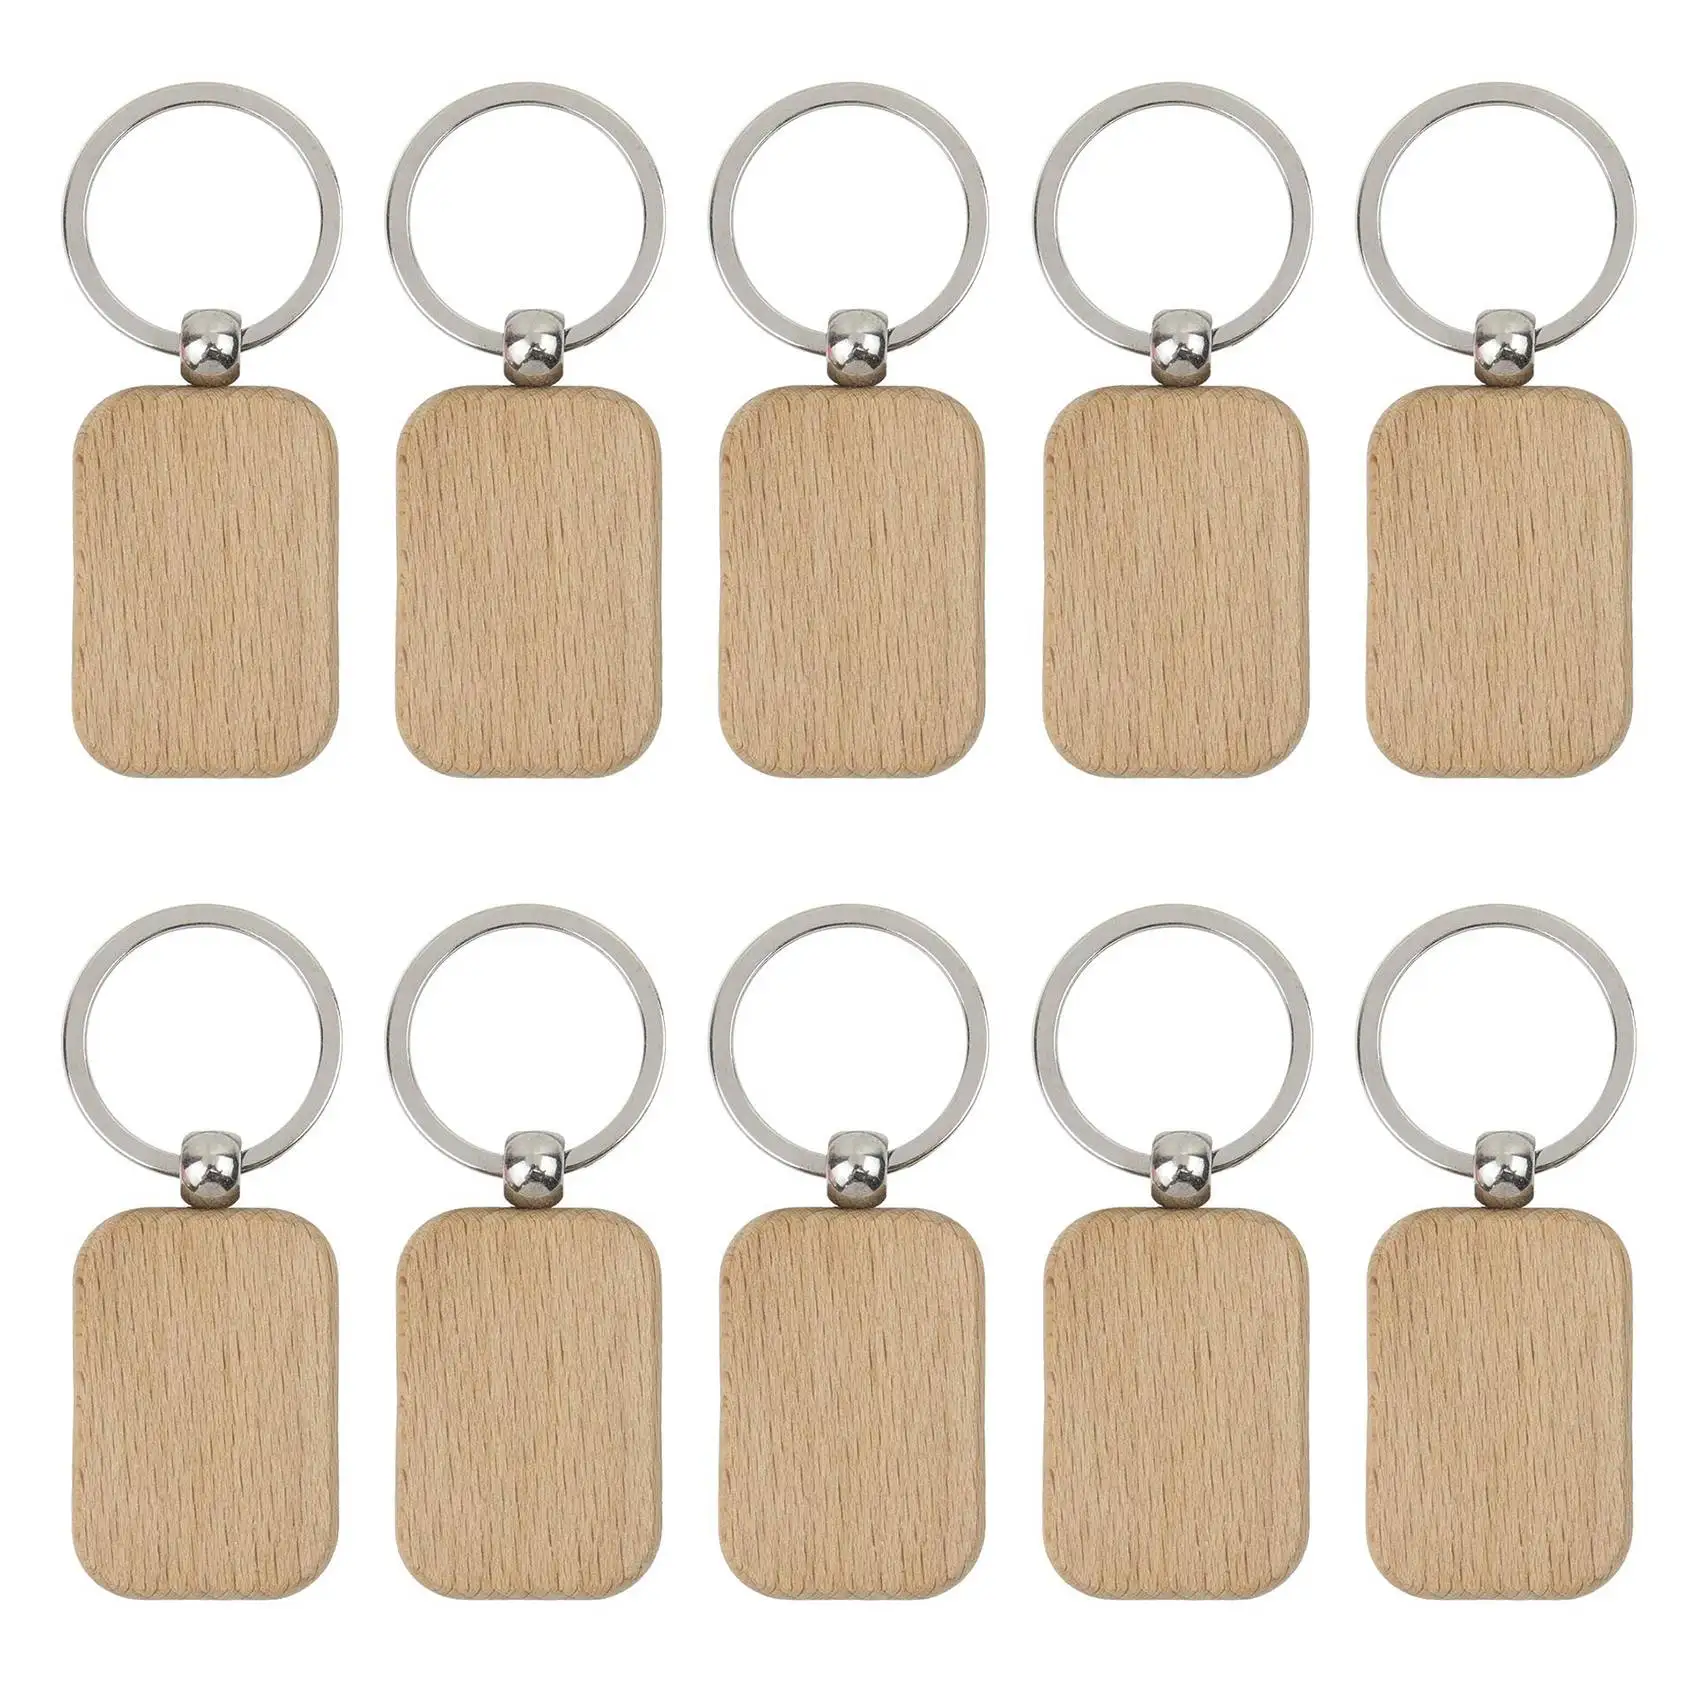 

10 Pack Blank Wooden Key Chain Unfinished Wood Pendant Blanks with Keyrings for EDC Tags DIY Key Craft Supplies